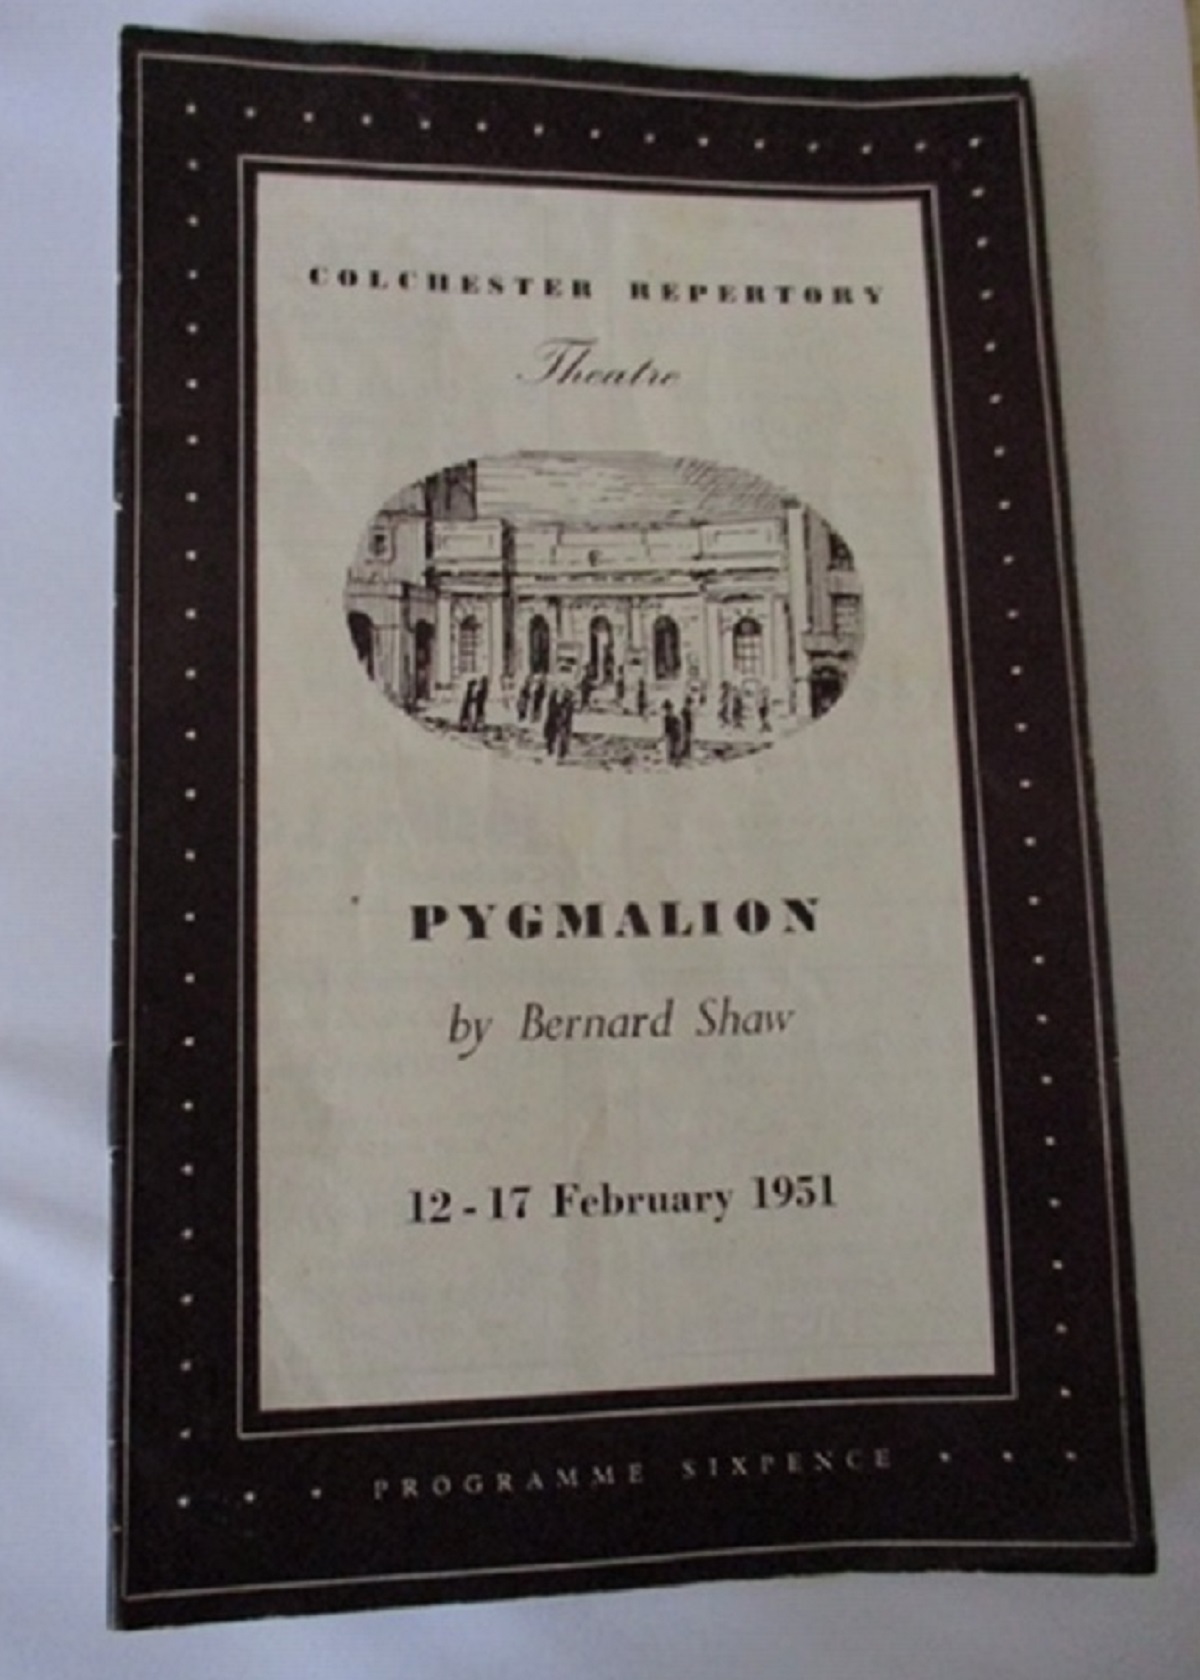 Changing times - the front cover of the programme from 1951